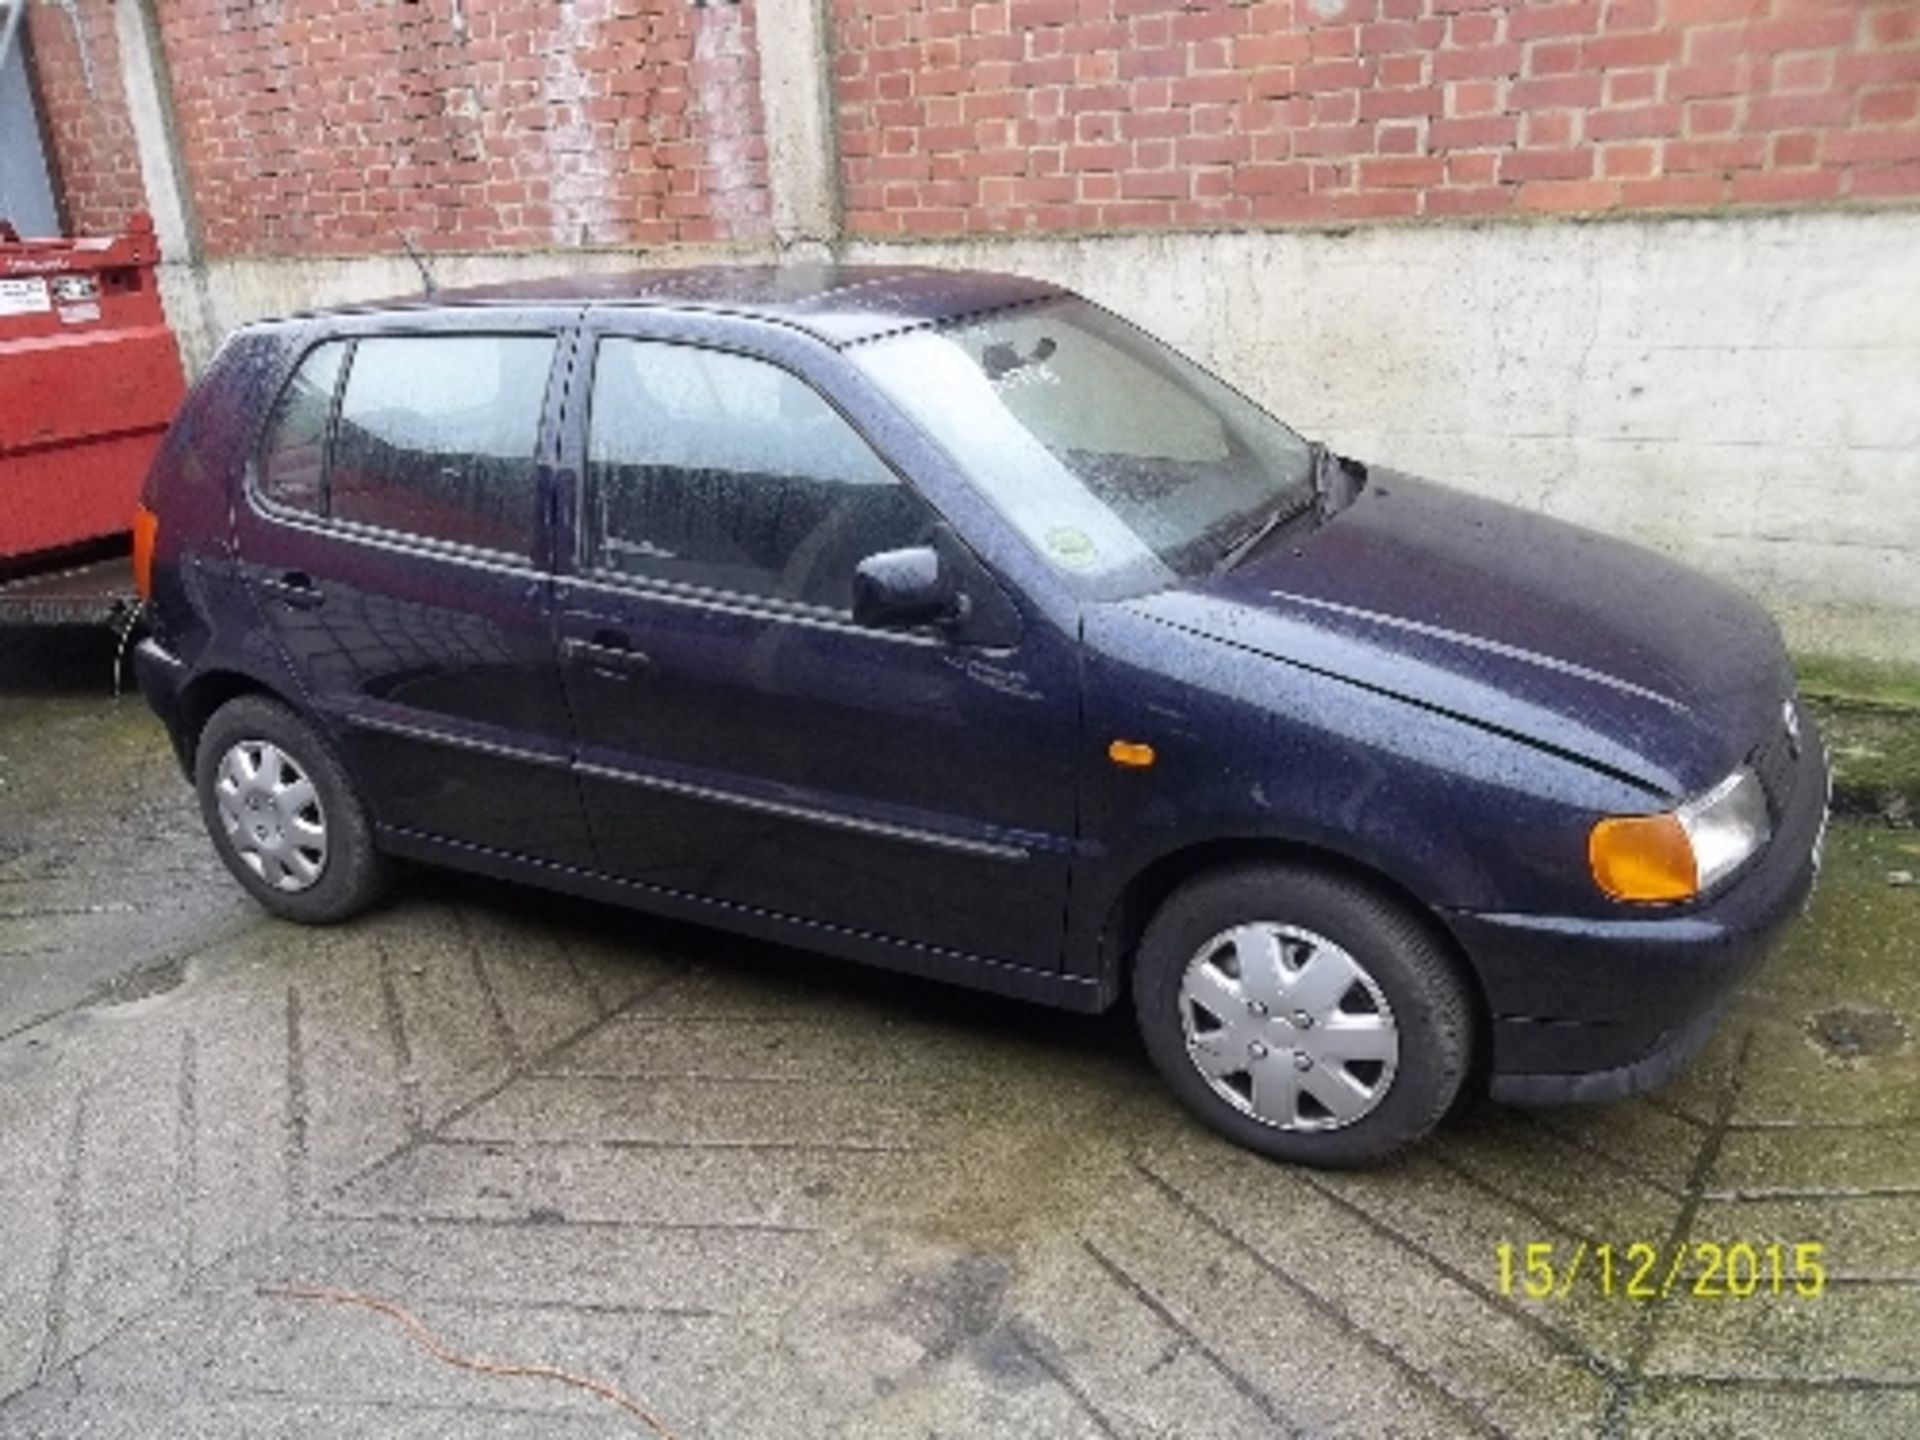 Volkswagen Polo 1.4 CL - S995 DJO Date of registration:  30.09.1998 1390cc, petrol, manual, blue - Image 2 of 4